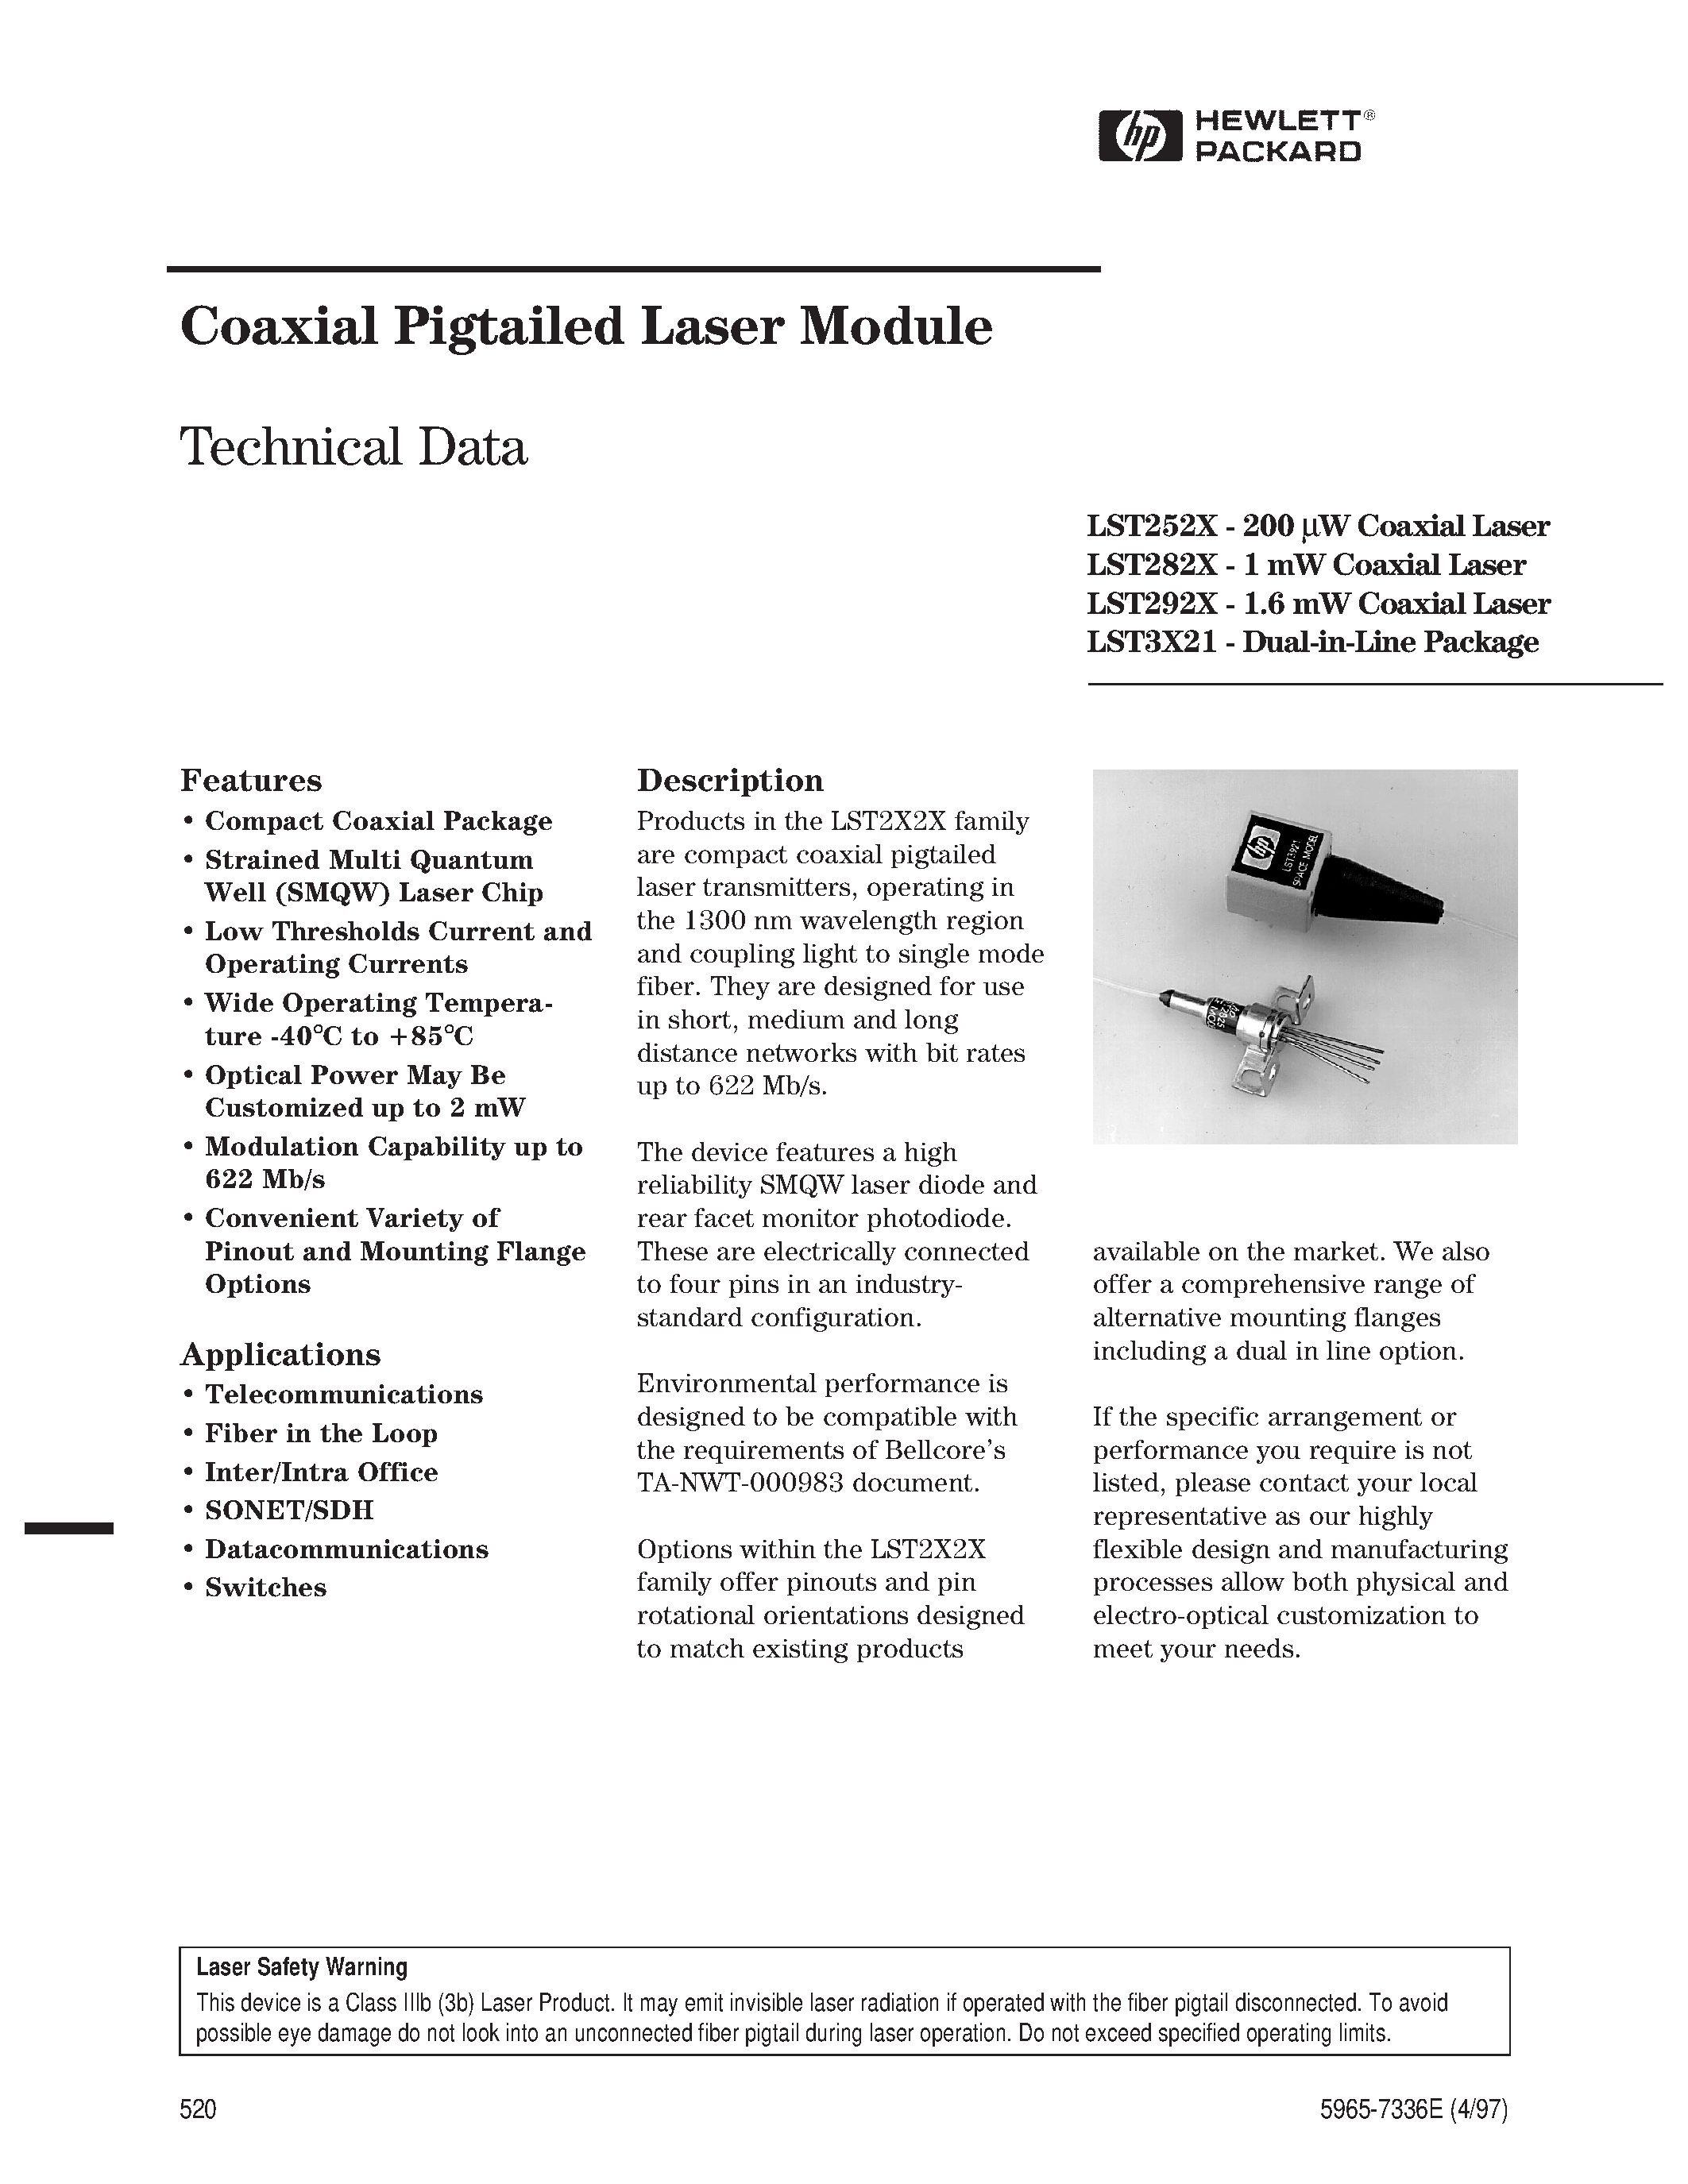 Даташит LST2525-S4-B-SF - Coaxial Pigtailed Laser Module страница 1